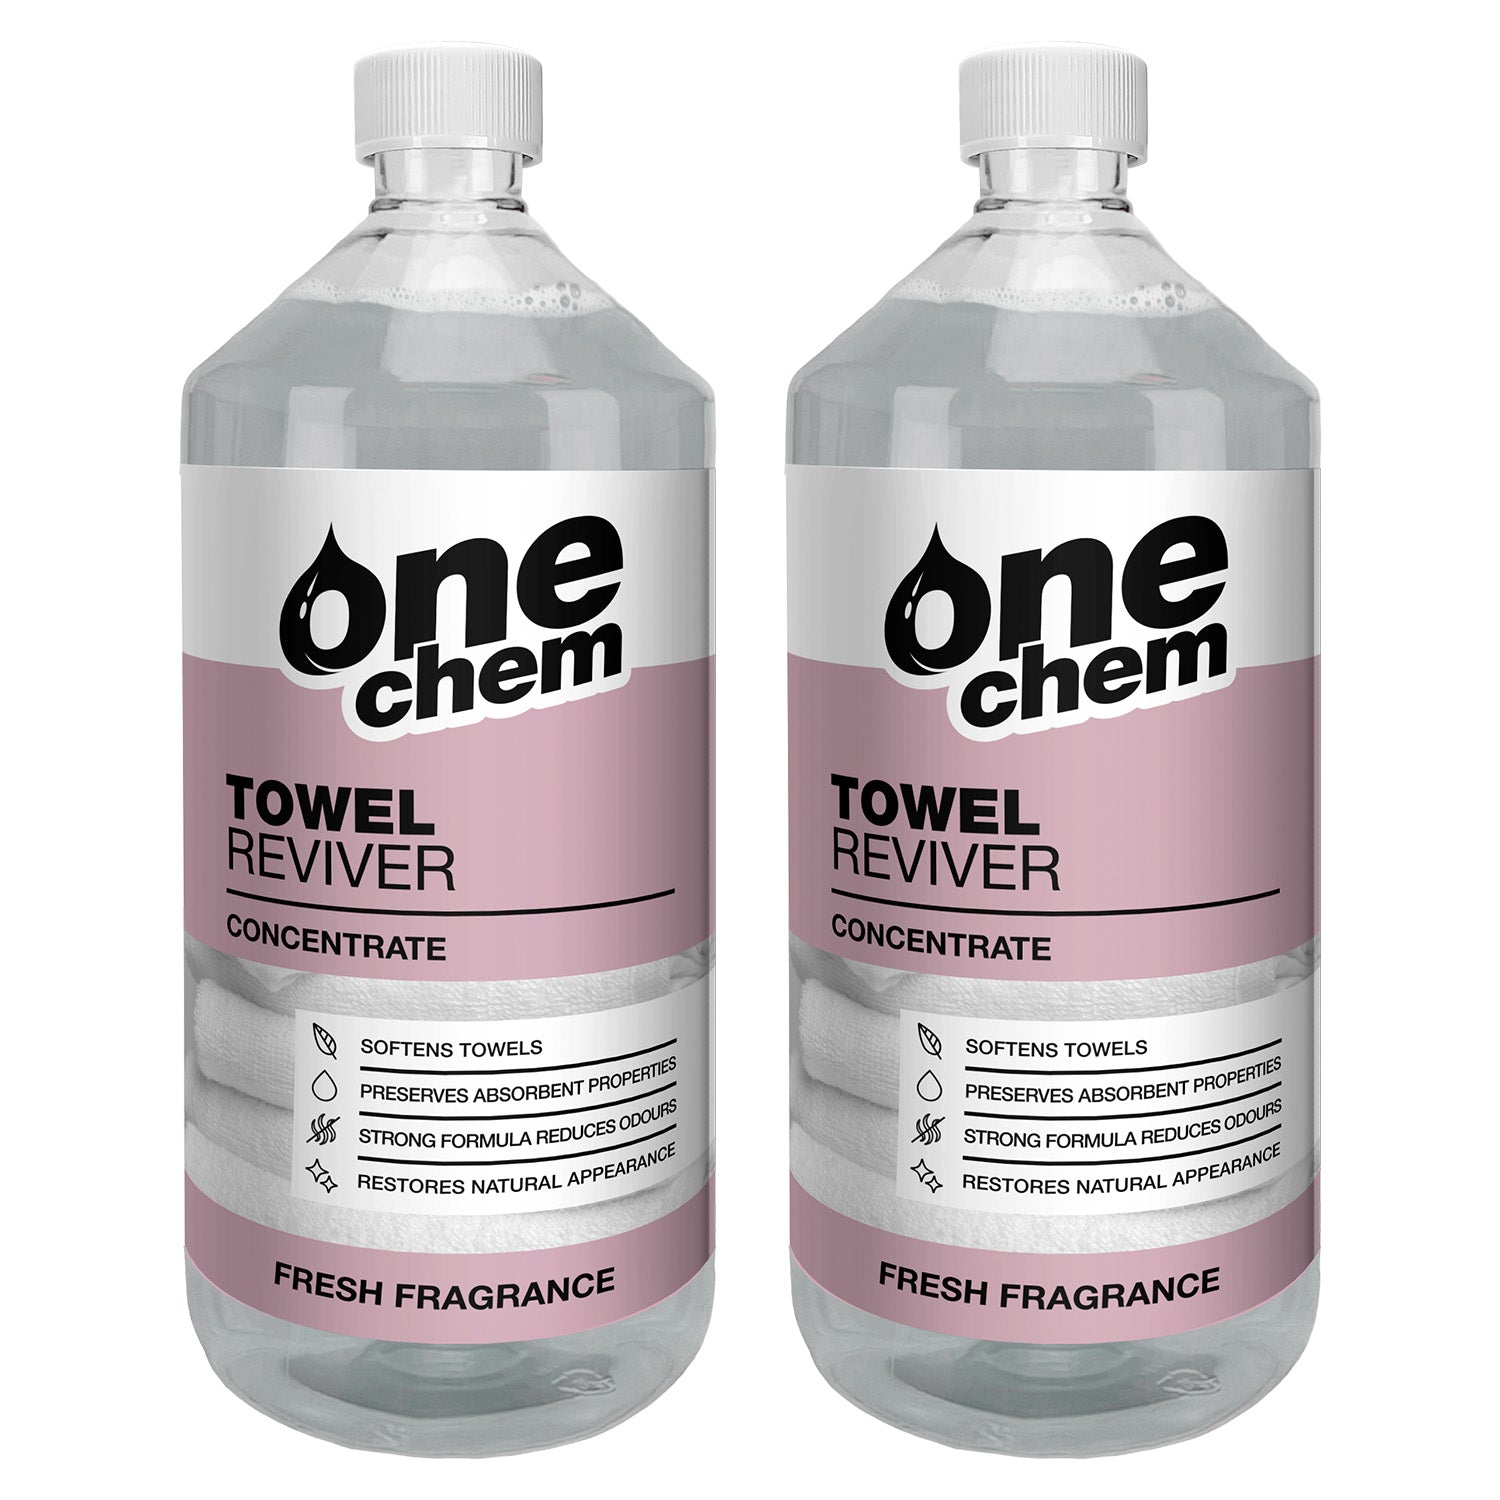 One Chem - Towel Reviver and Softener 2 x 1 Litre Concentrate